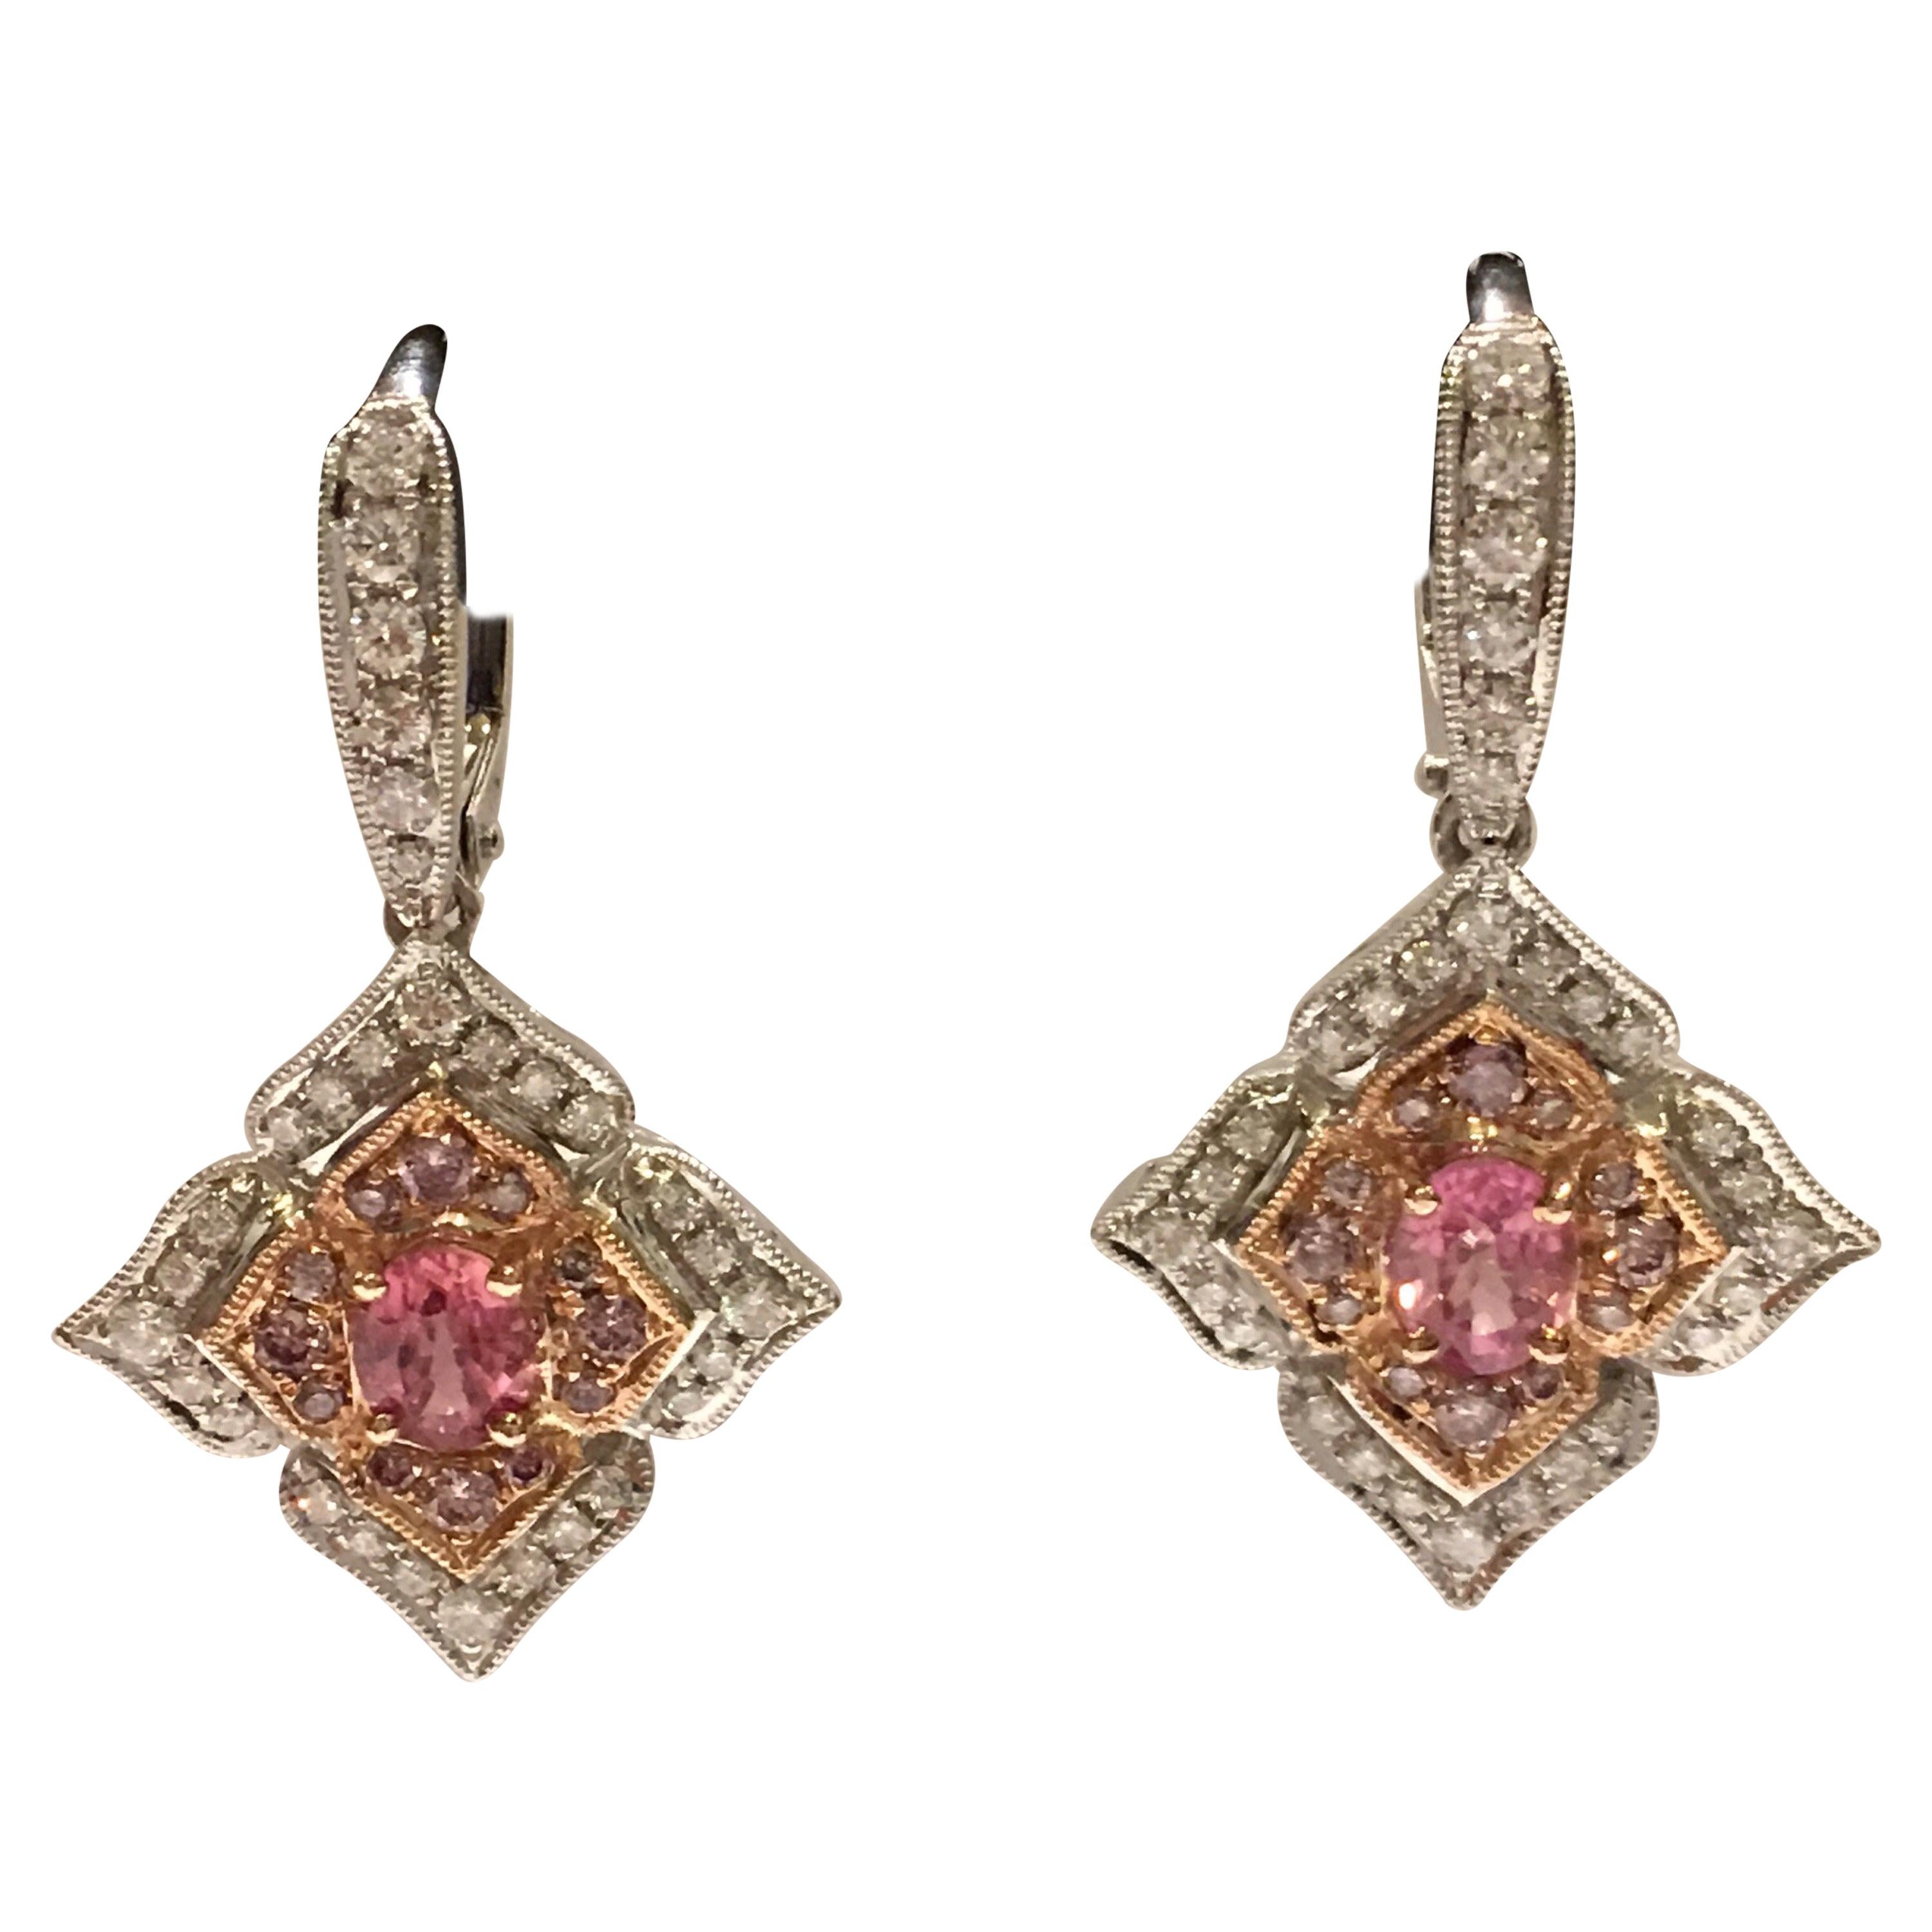 Padparadscha Sapphire and Diamond Earrings | First State Auctions Australia